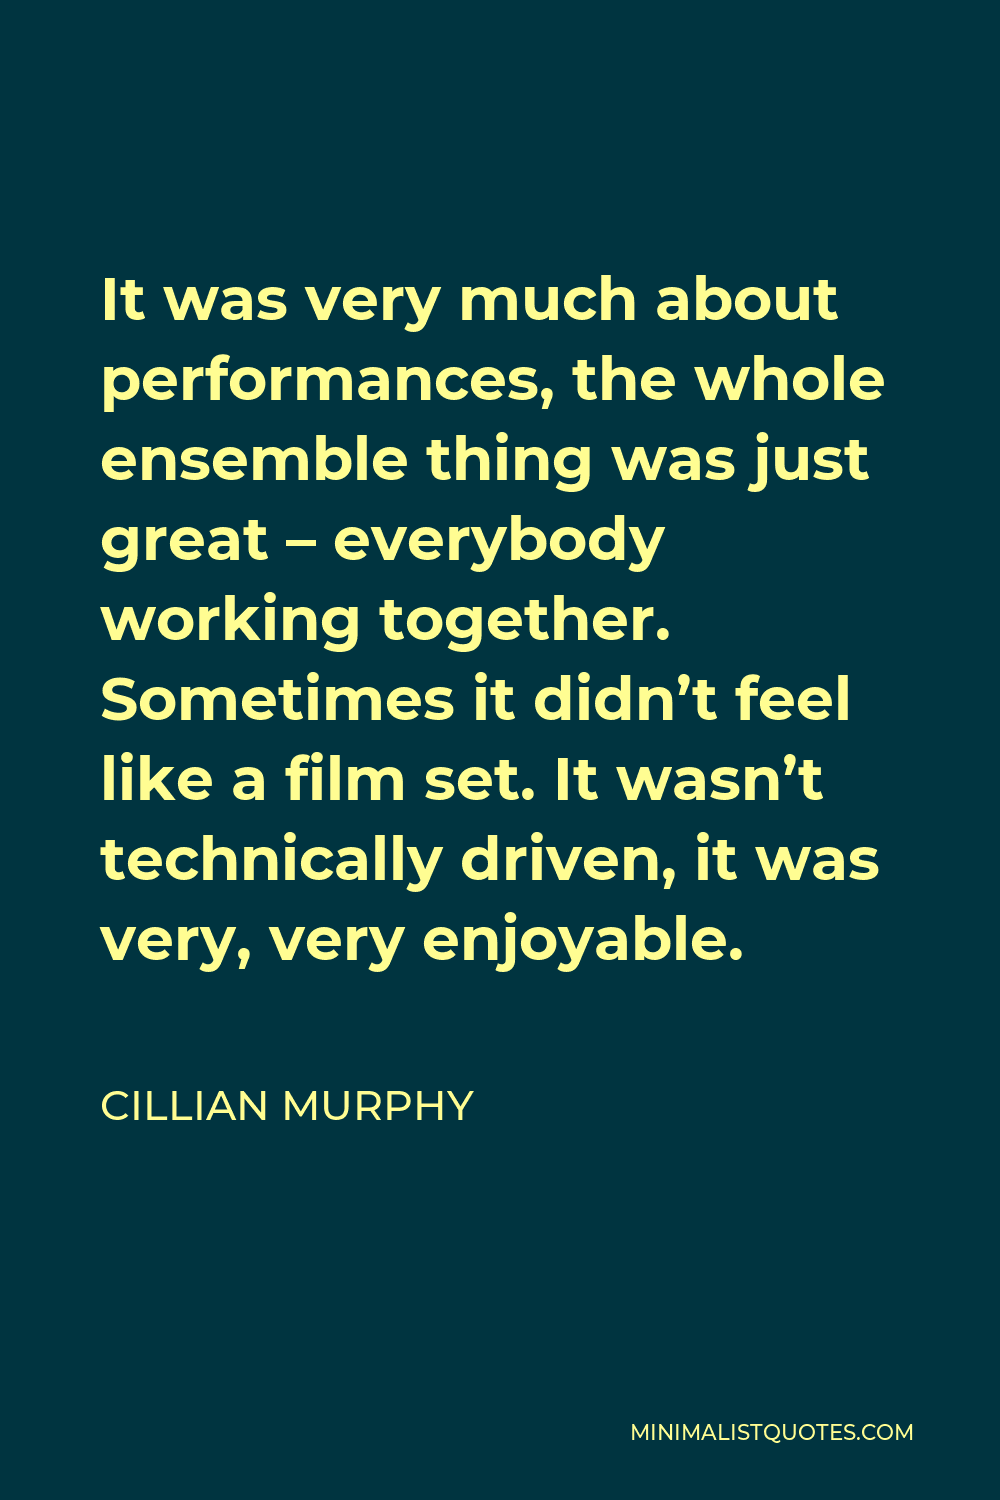 Cillian Murphy Quote - It was very much about performances, the whole ensemble thing was just great – everybody working together. Sometimes it didn’t feel like a film set. It wasn’t technically driven, it was very, very enjoyable.